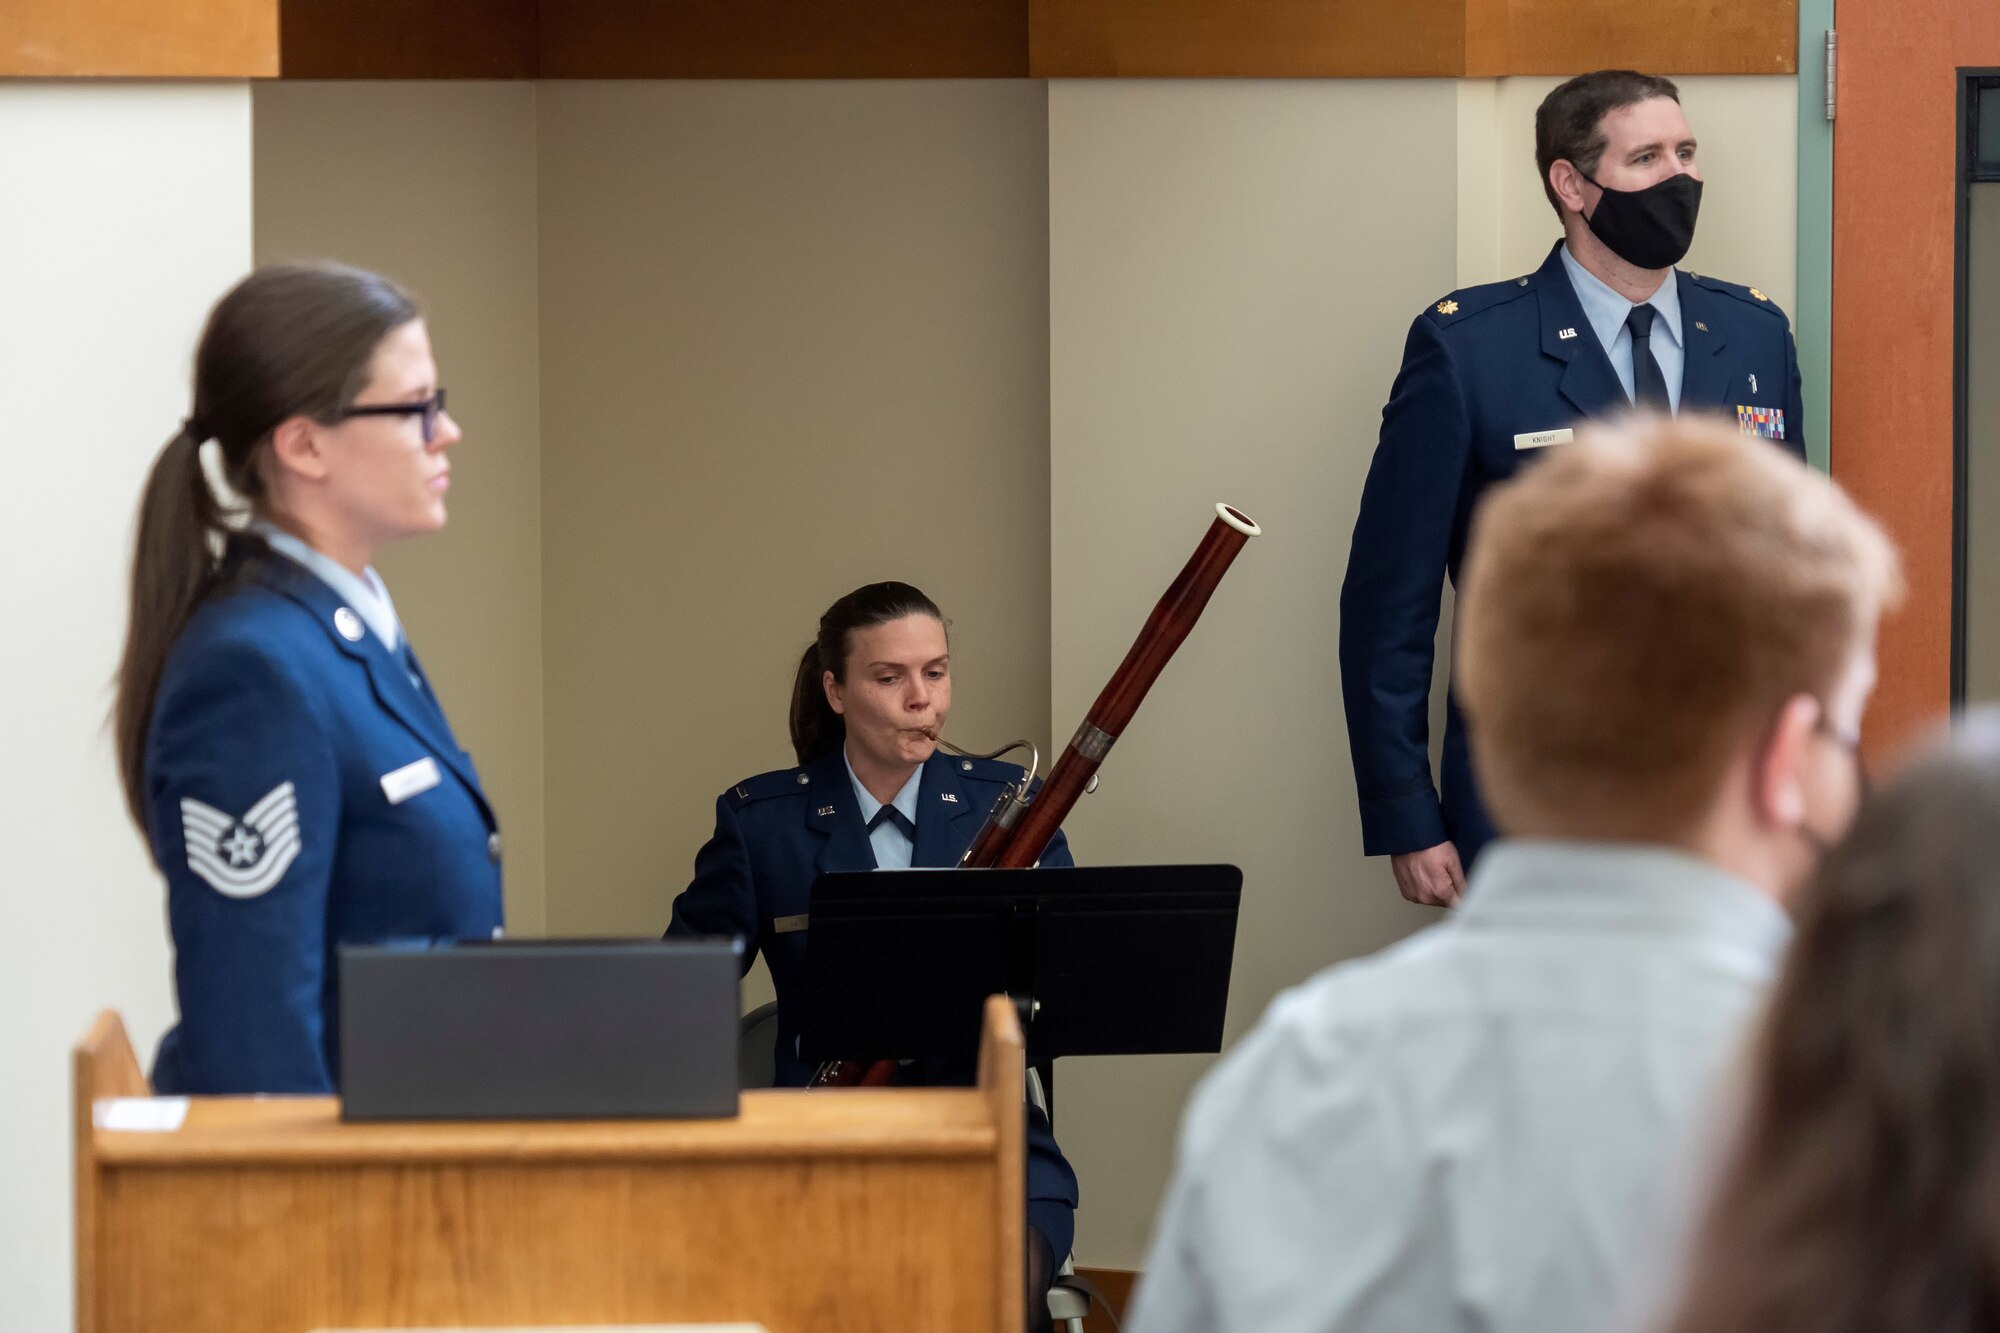 Airman of Note: AFMAO Airman shares musical talent with team